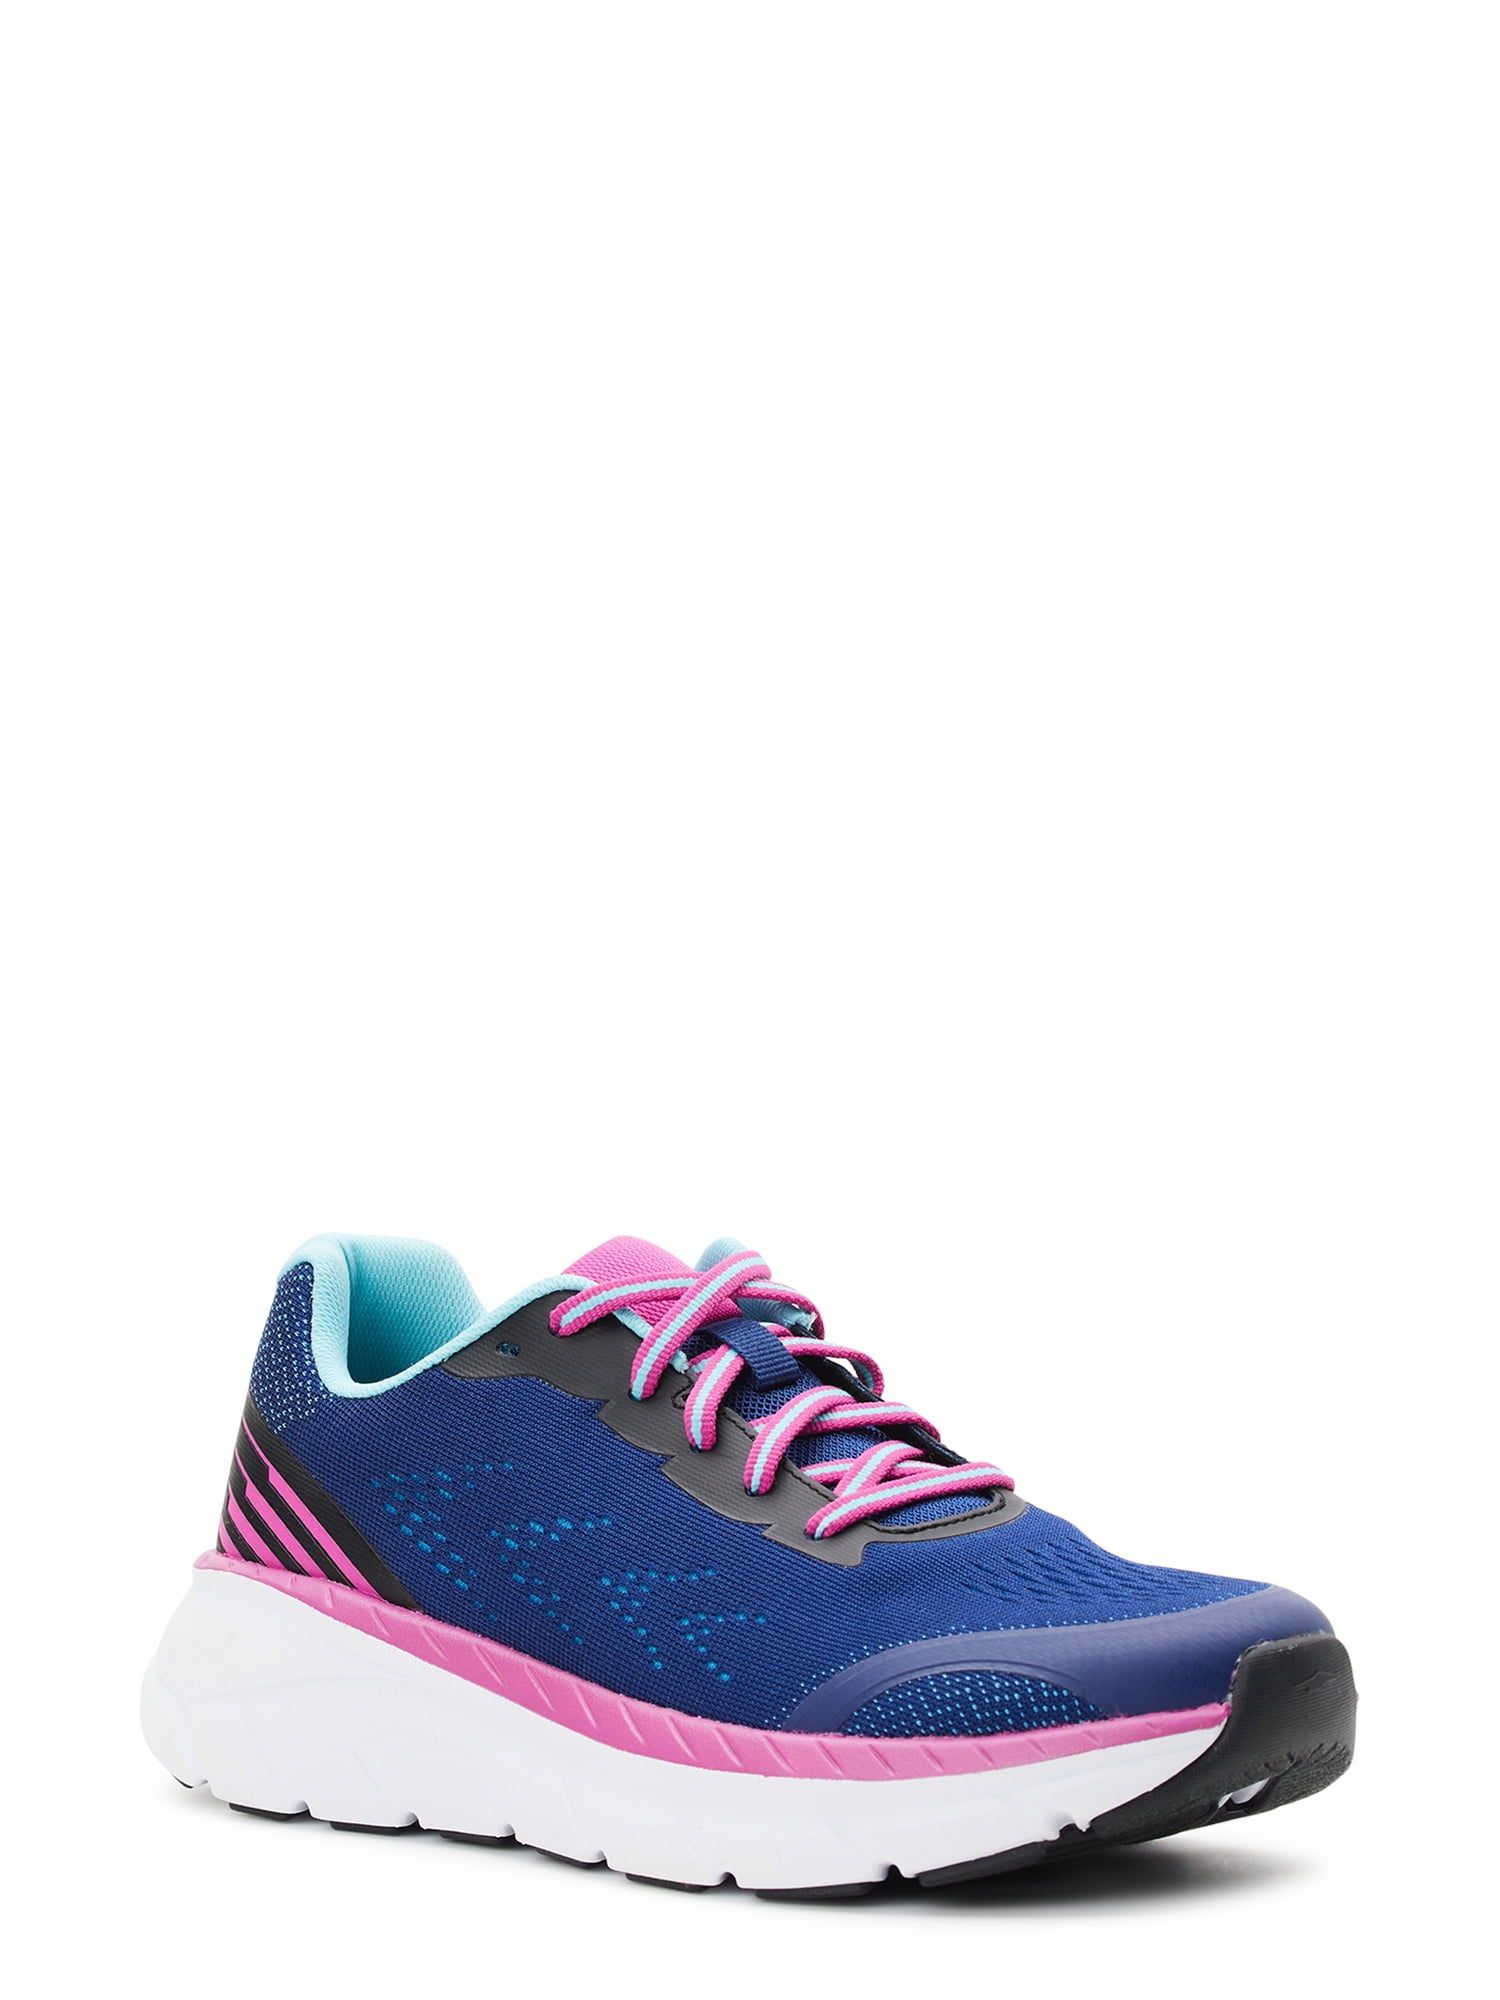 Avia Women's Hightail Athletic Sneakers, Wide Width Available 